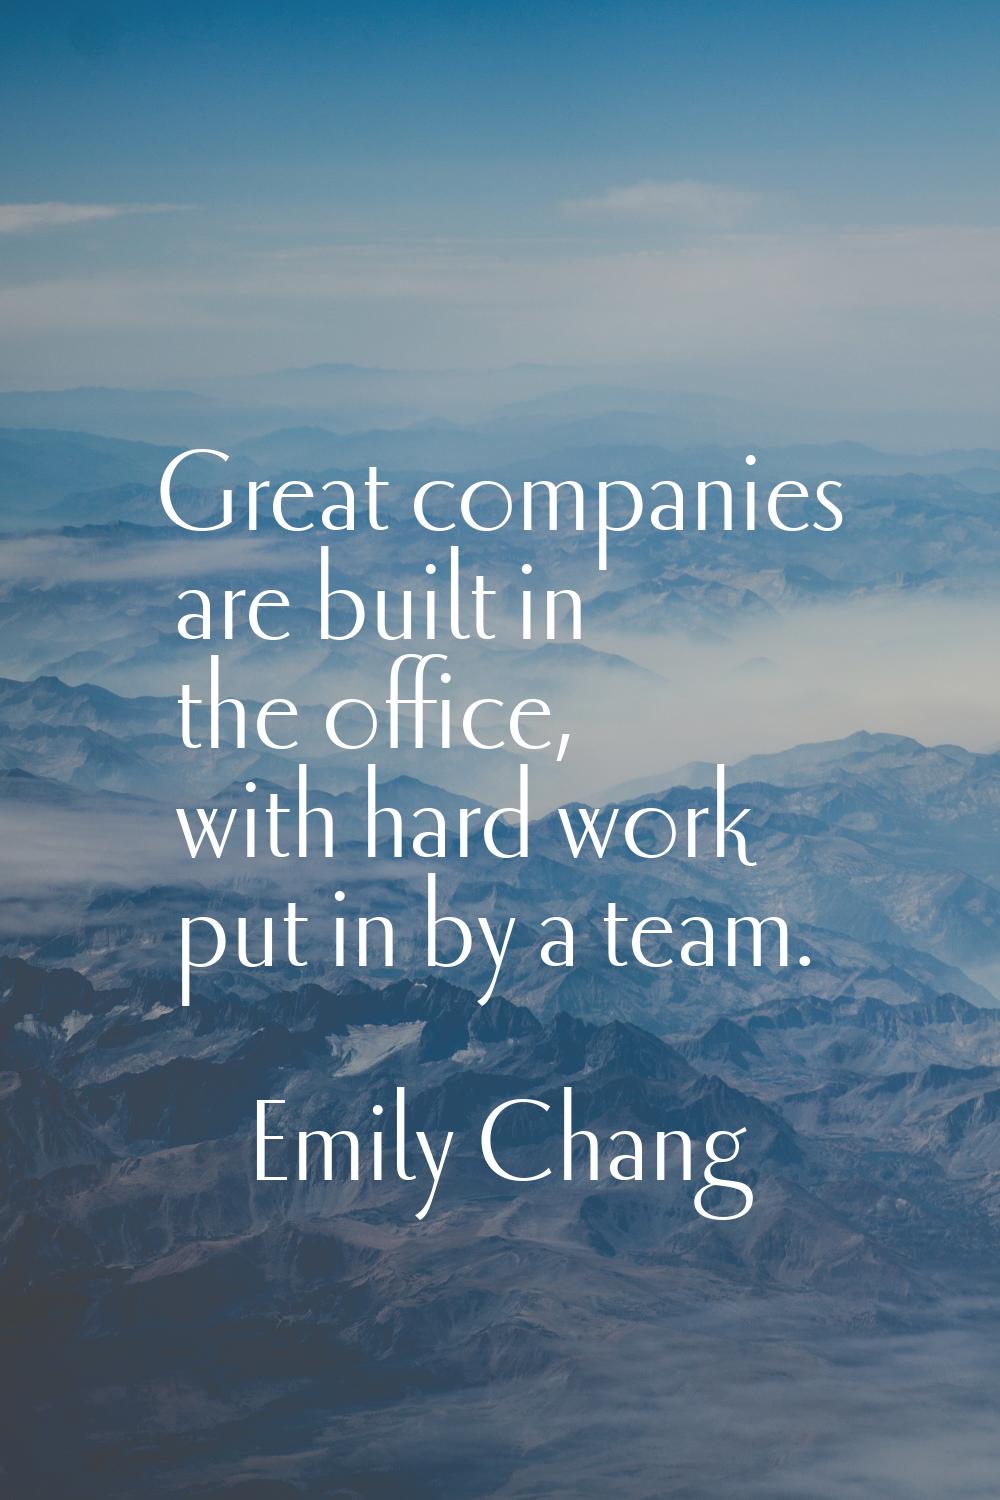 Great companies are built in the office, with hard work put in by a team.